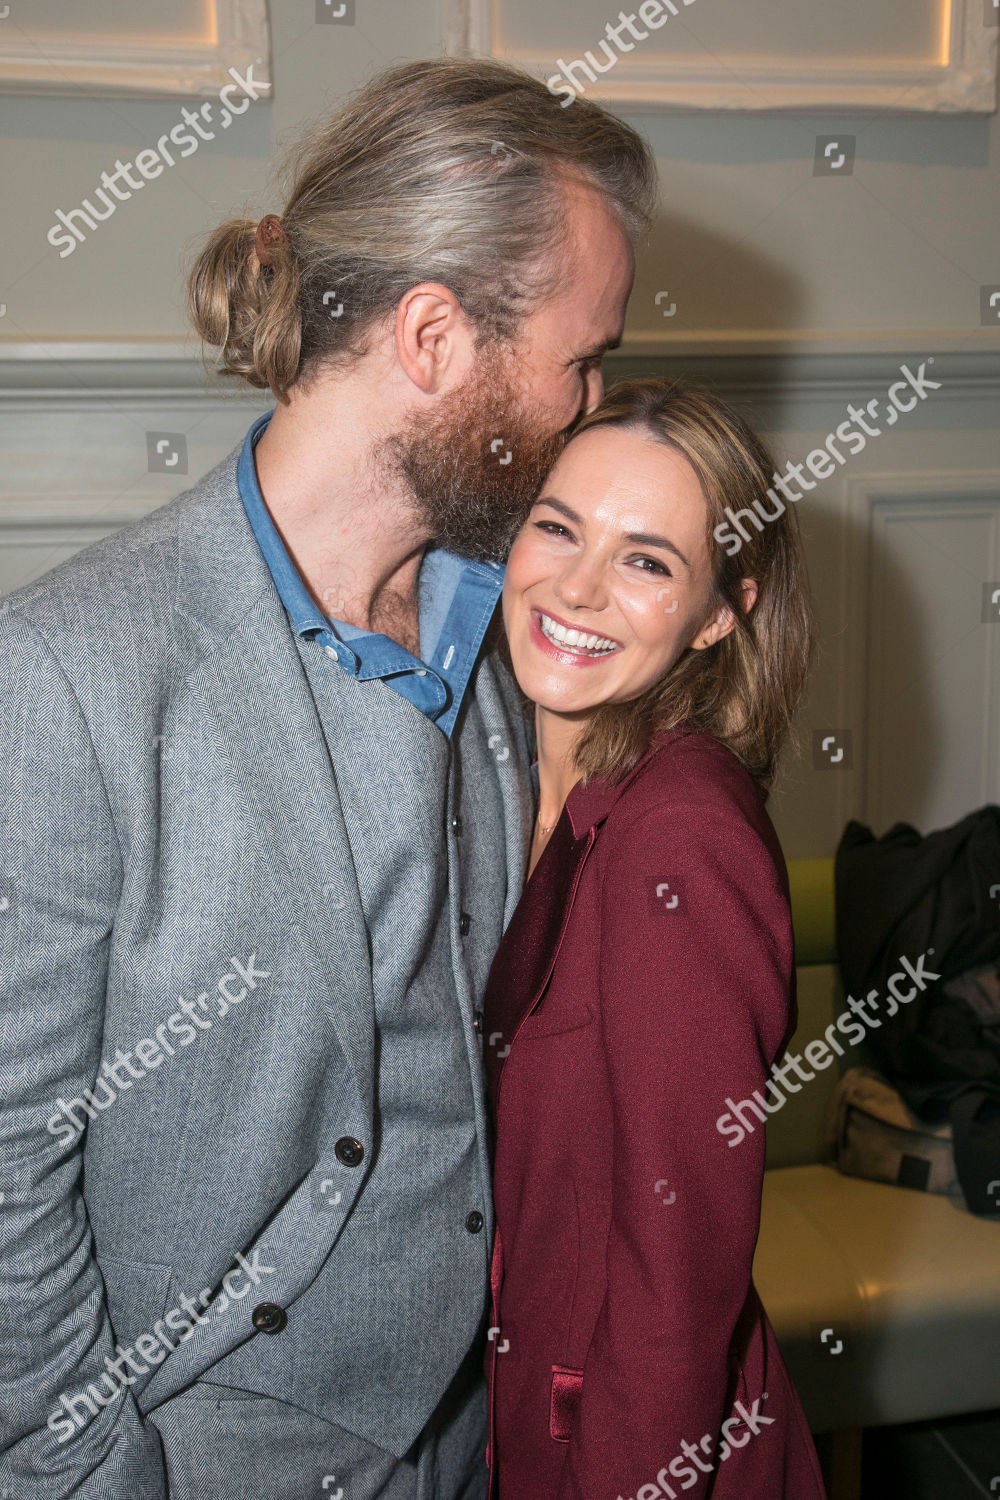 the-man-in-the-white-suit-party-press-night-london-uk-shutterstock-editorial-10439379a.jpg